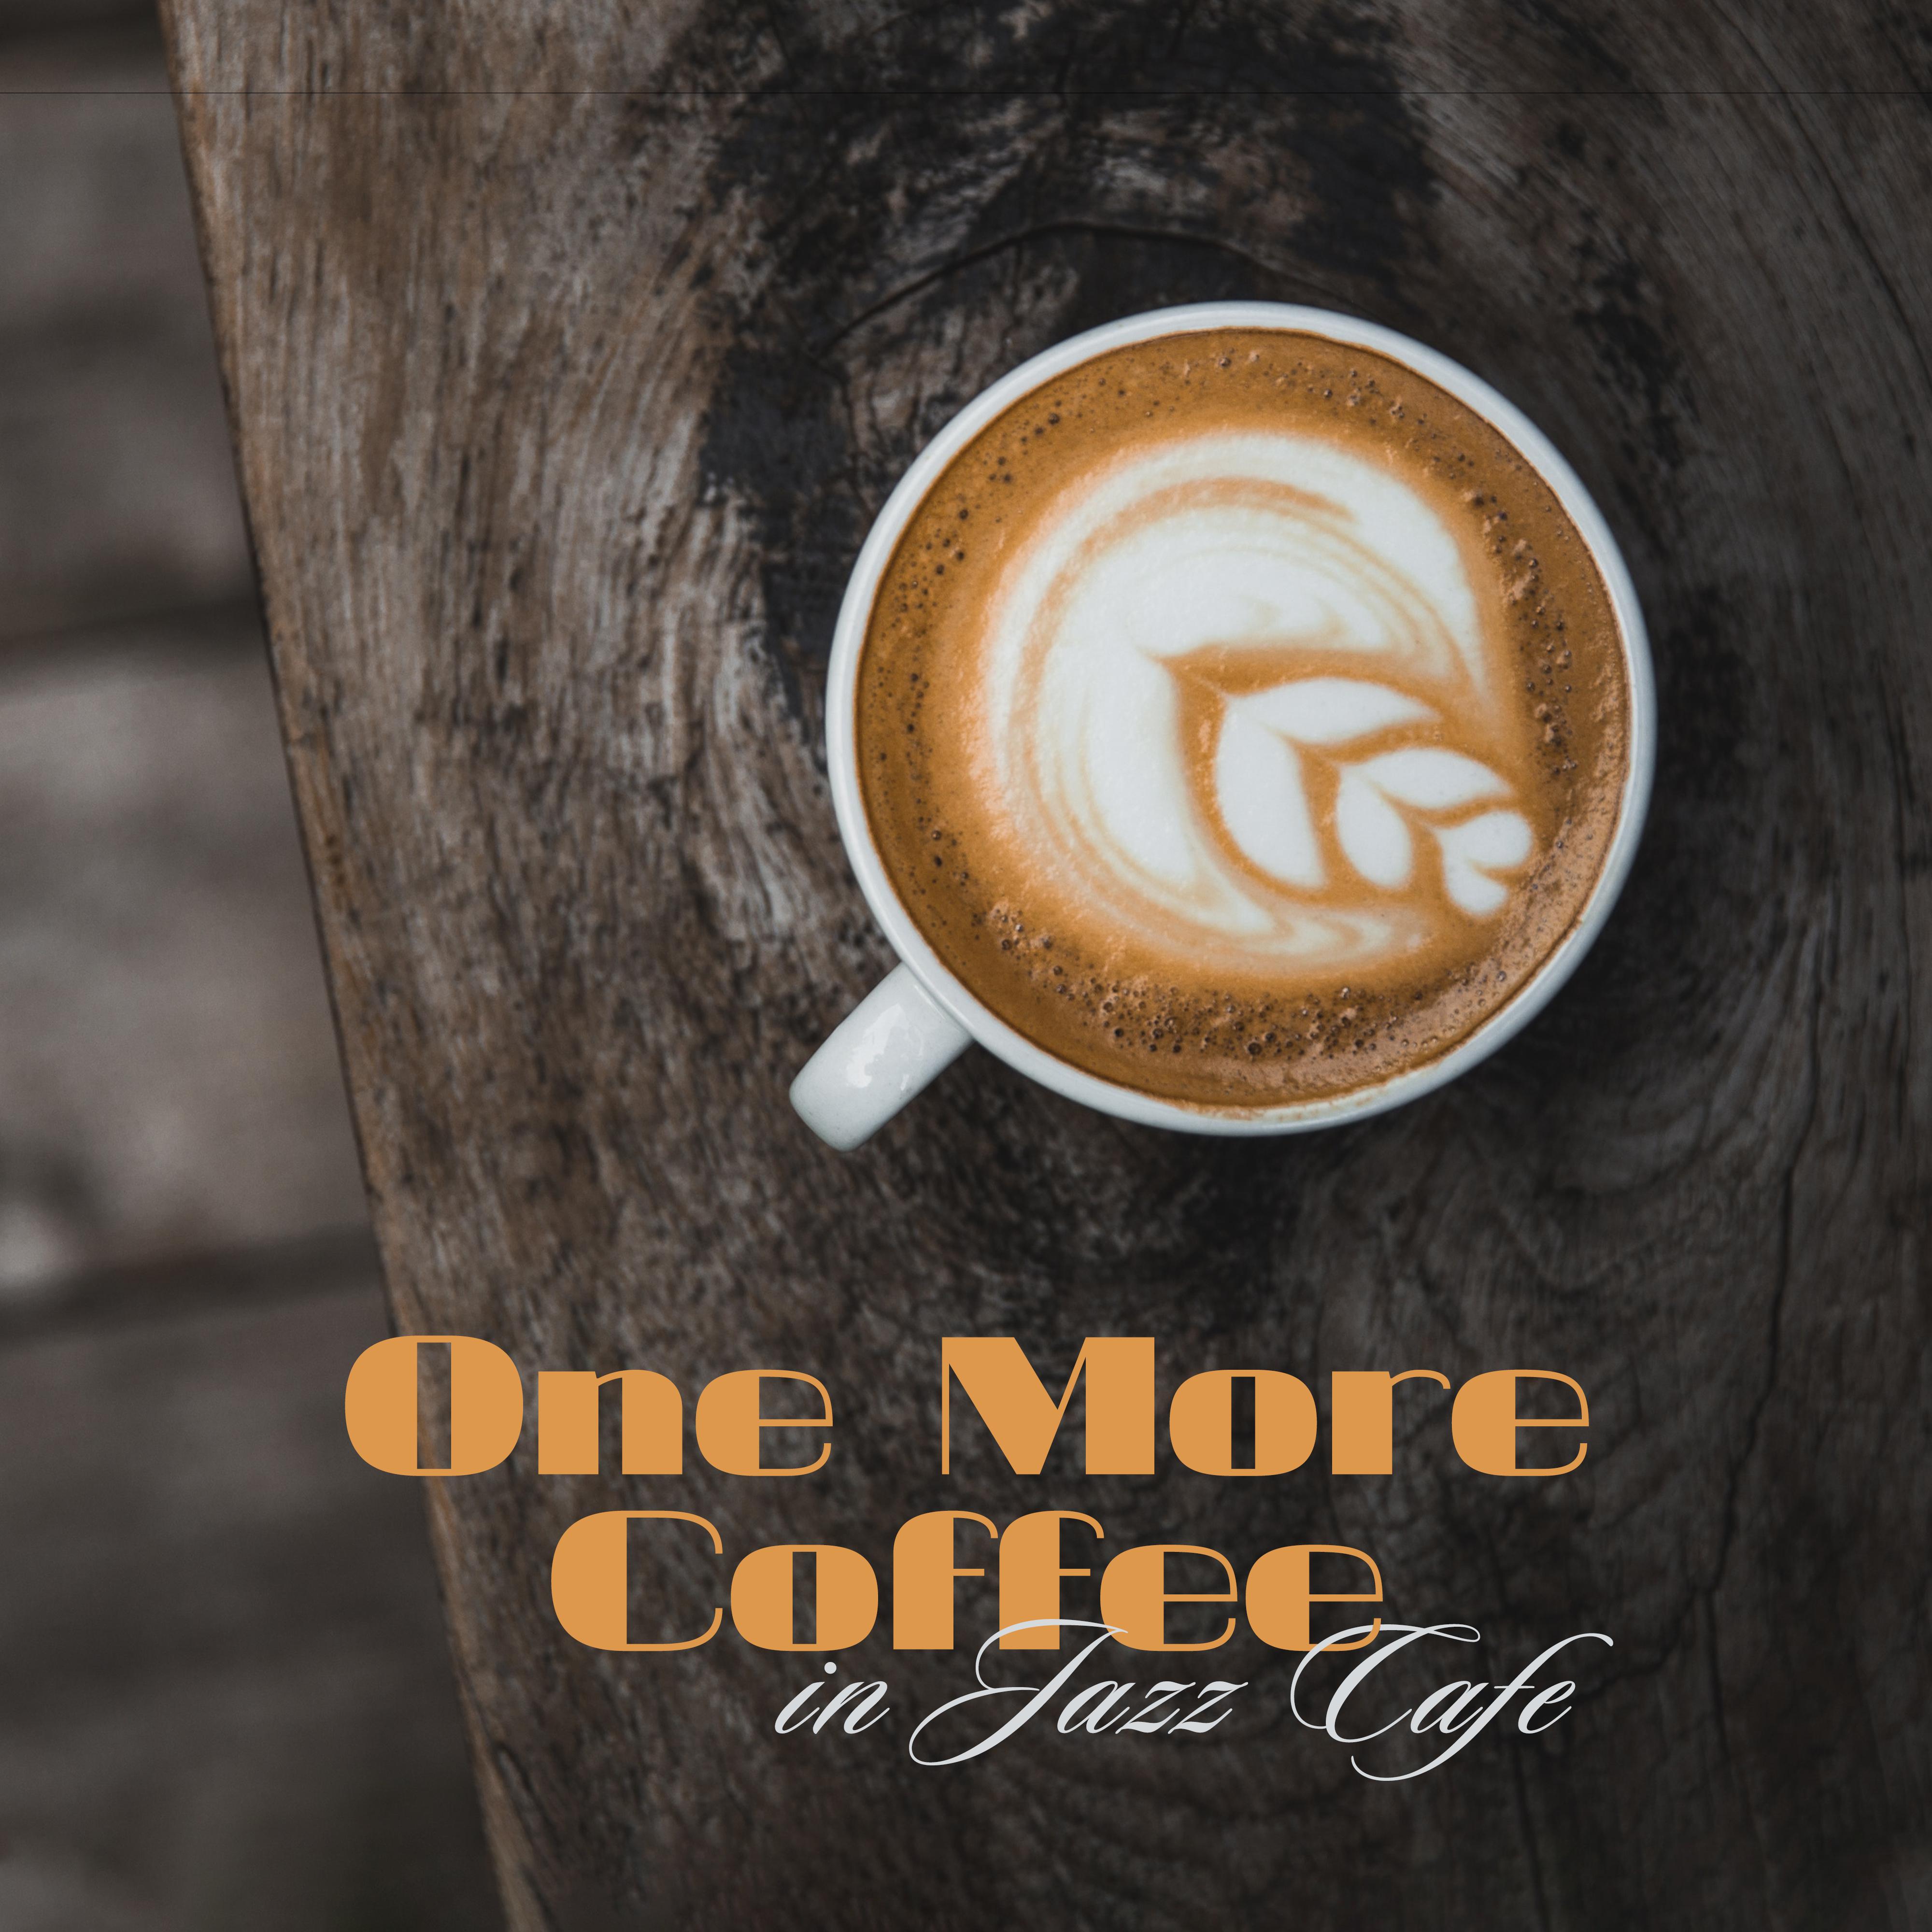 One More Coffee in Jazz Cafe: Smooth Jazz Music 2019 Compilation, Relaxing Sounds for Cafe, Background Songs for Friends Meeting